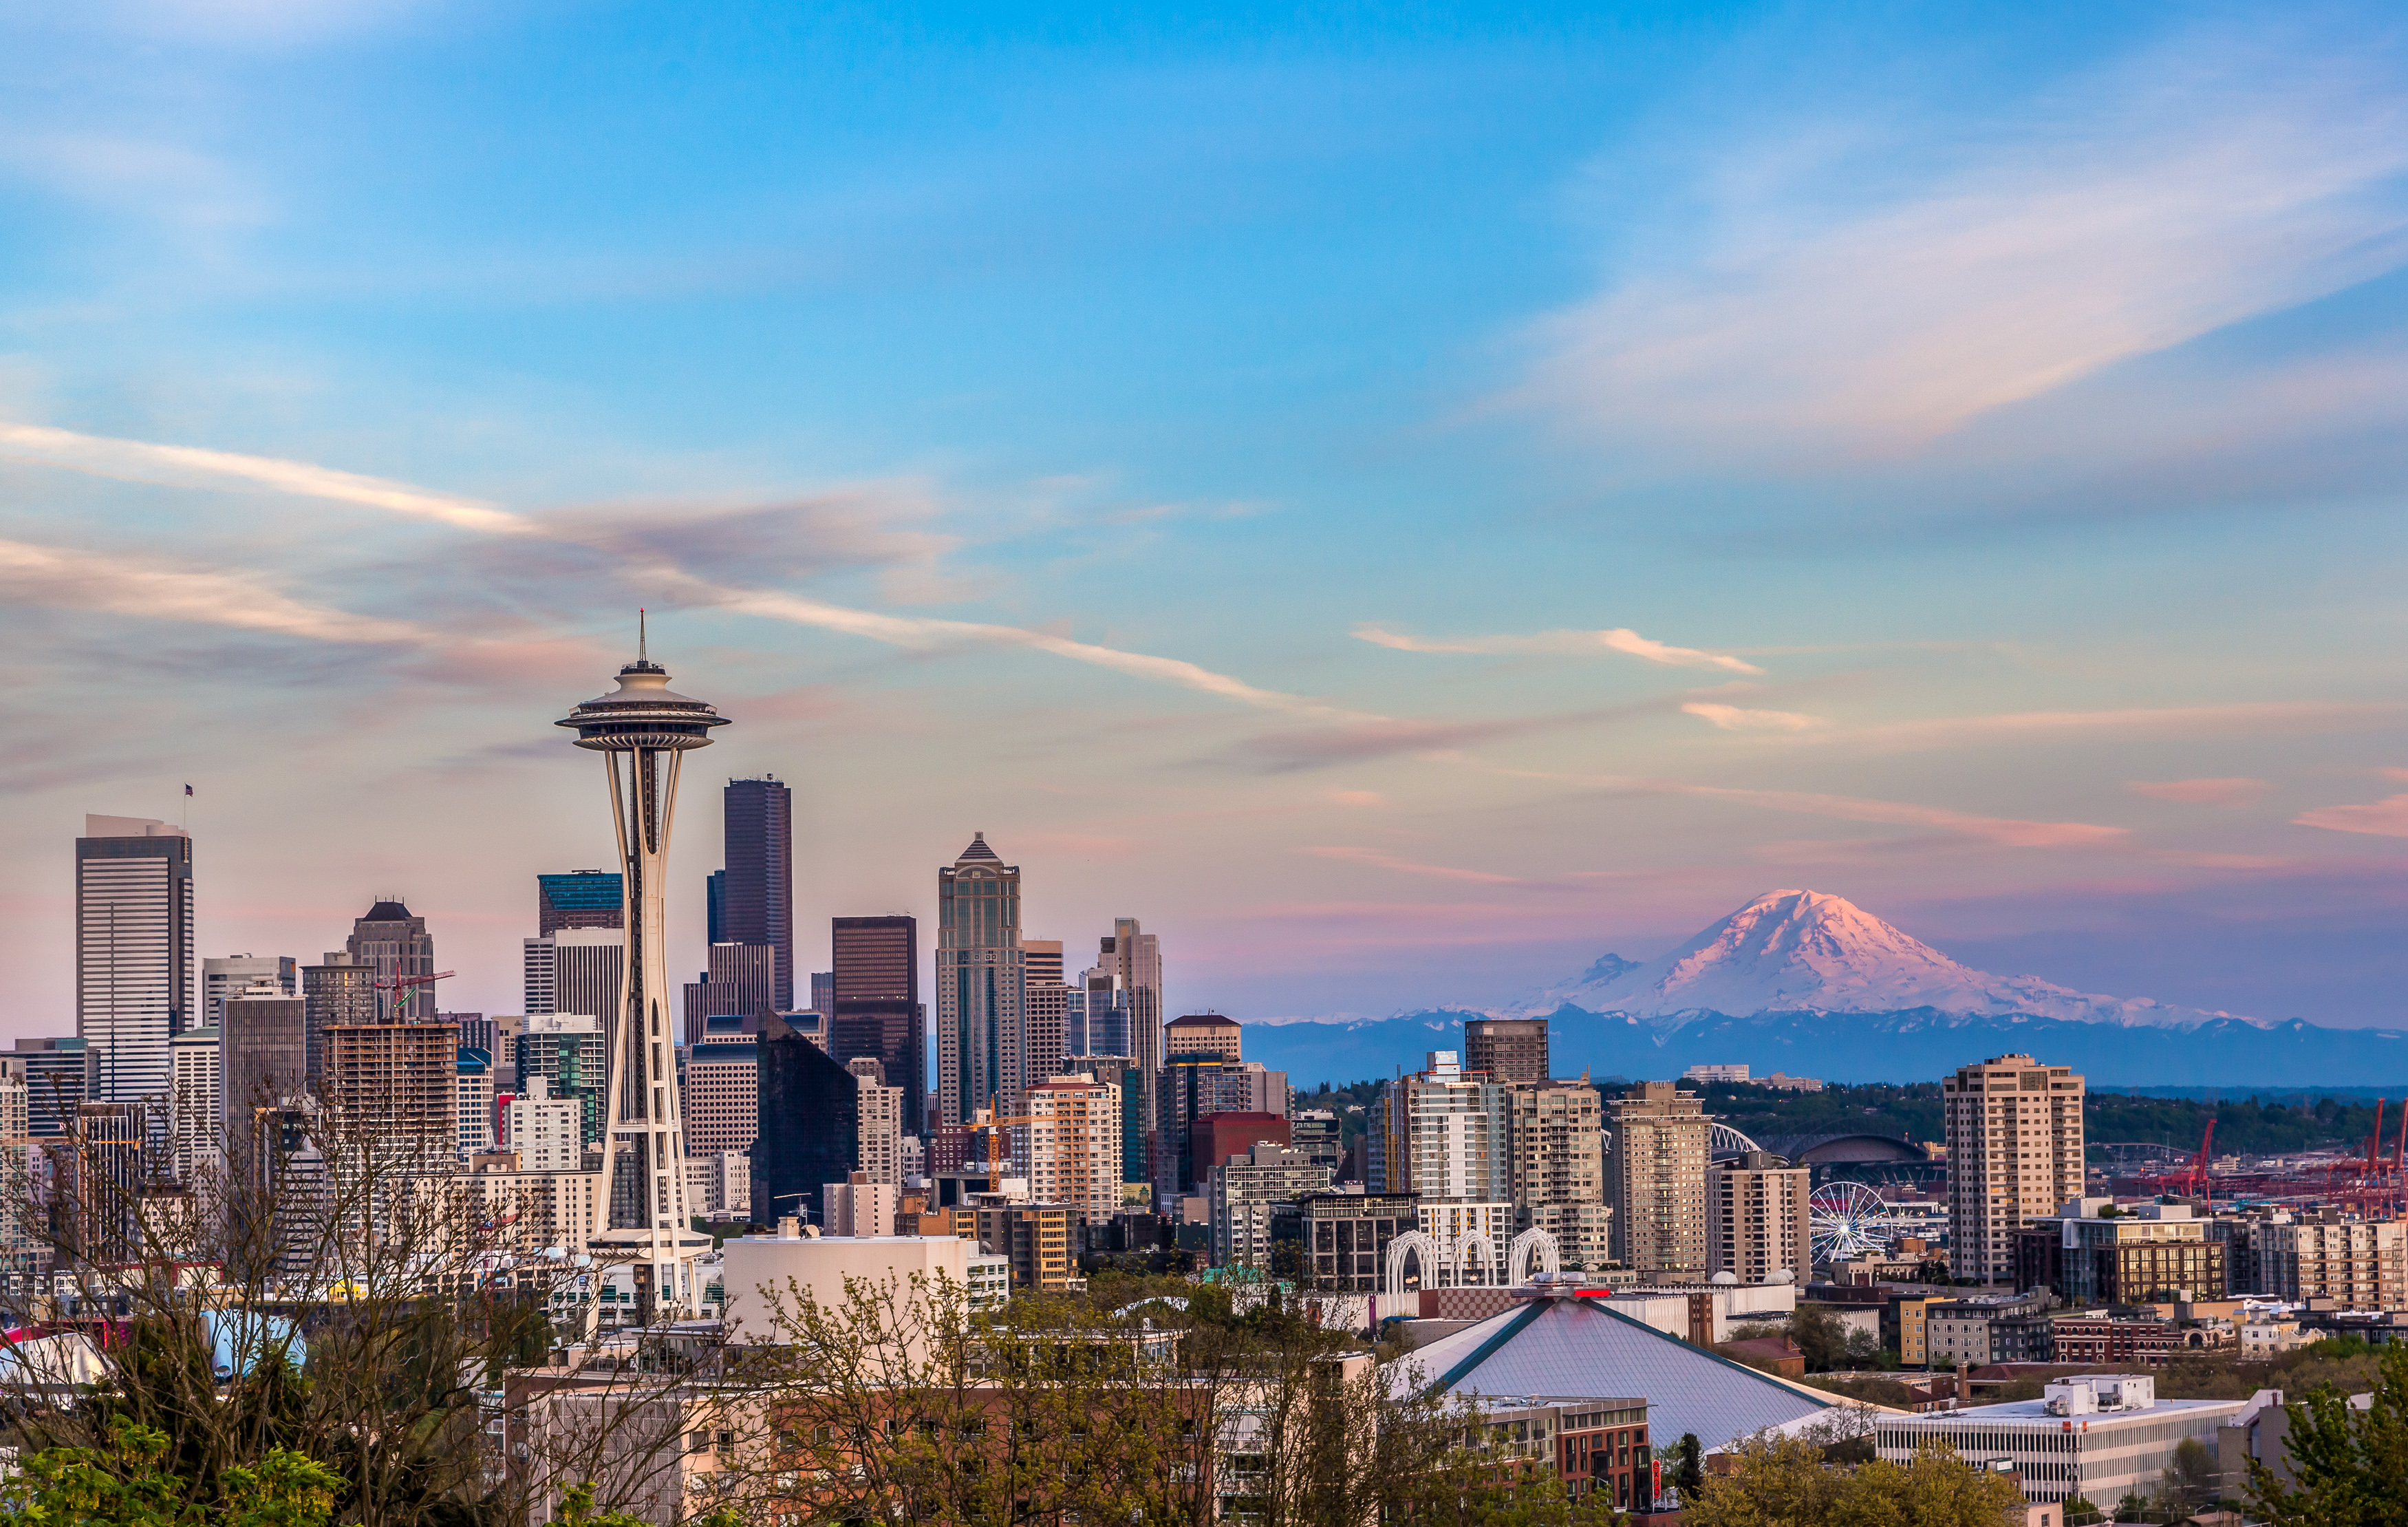 Seattle downtown skyline and Mt. Rainier at sunset. WA from Kerry park.